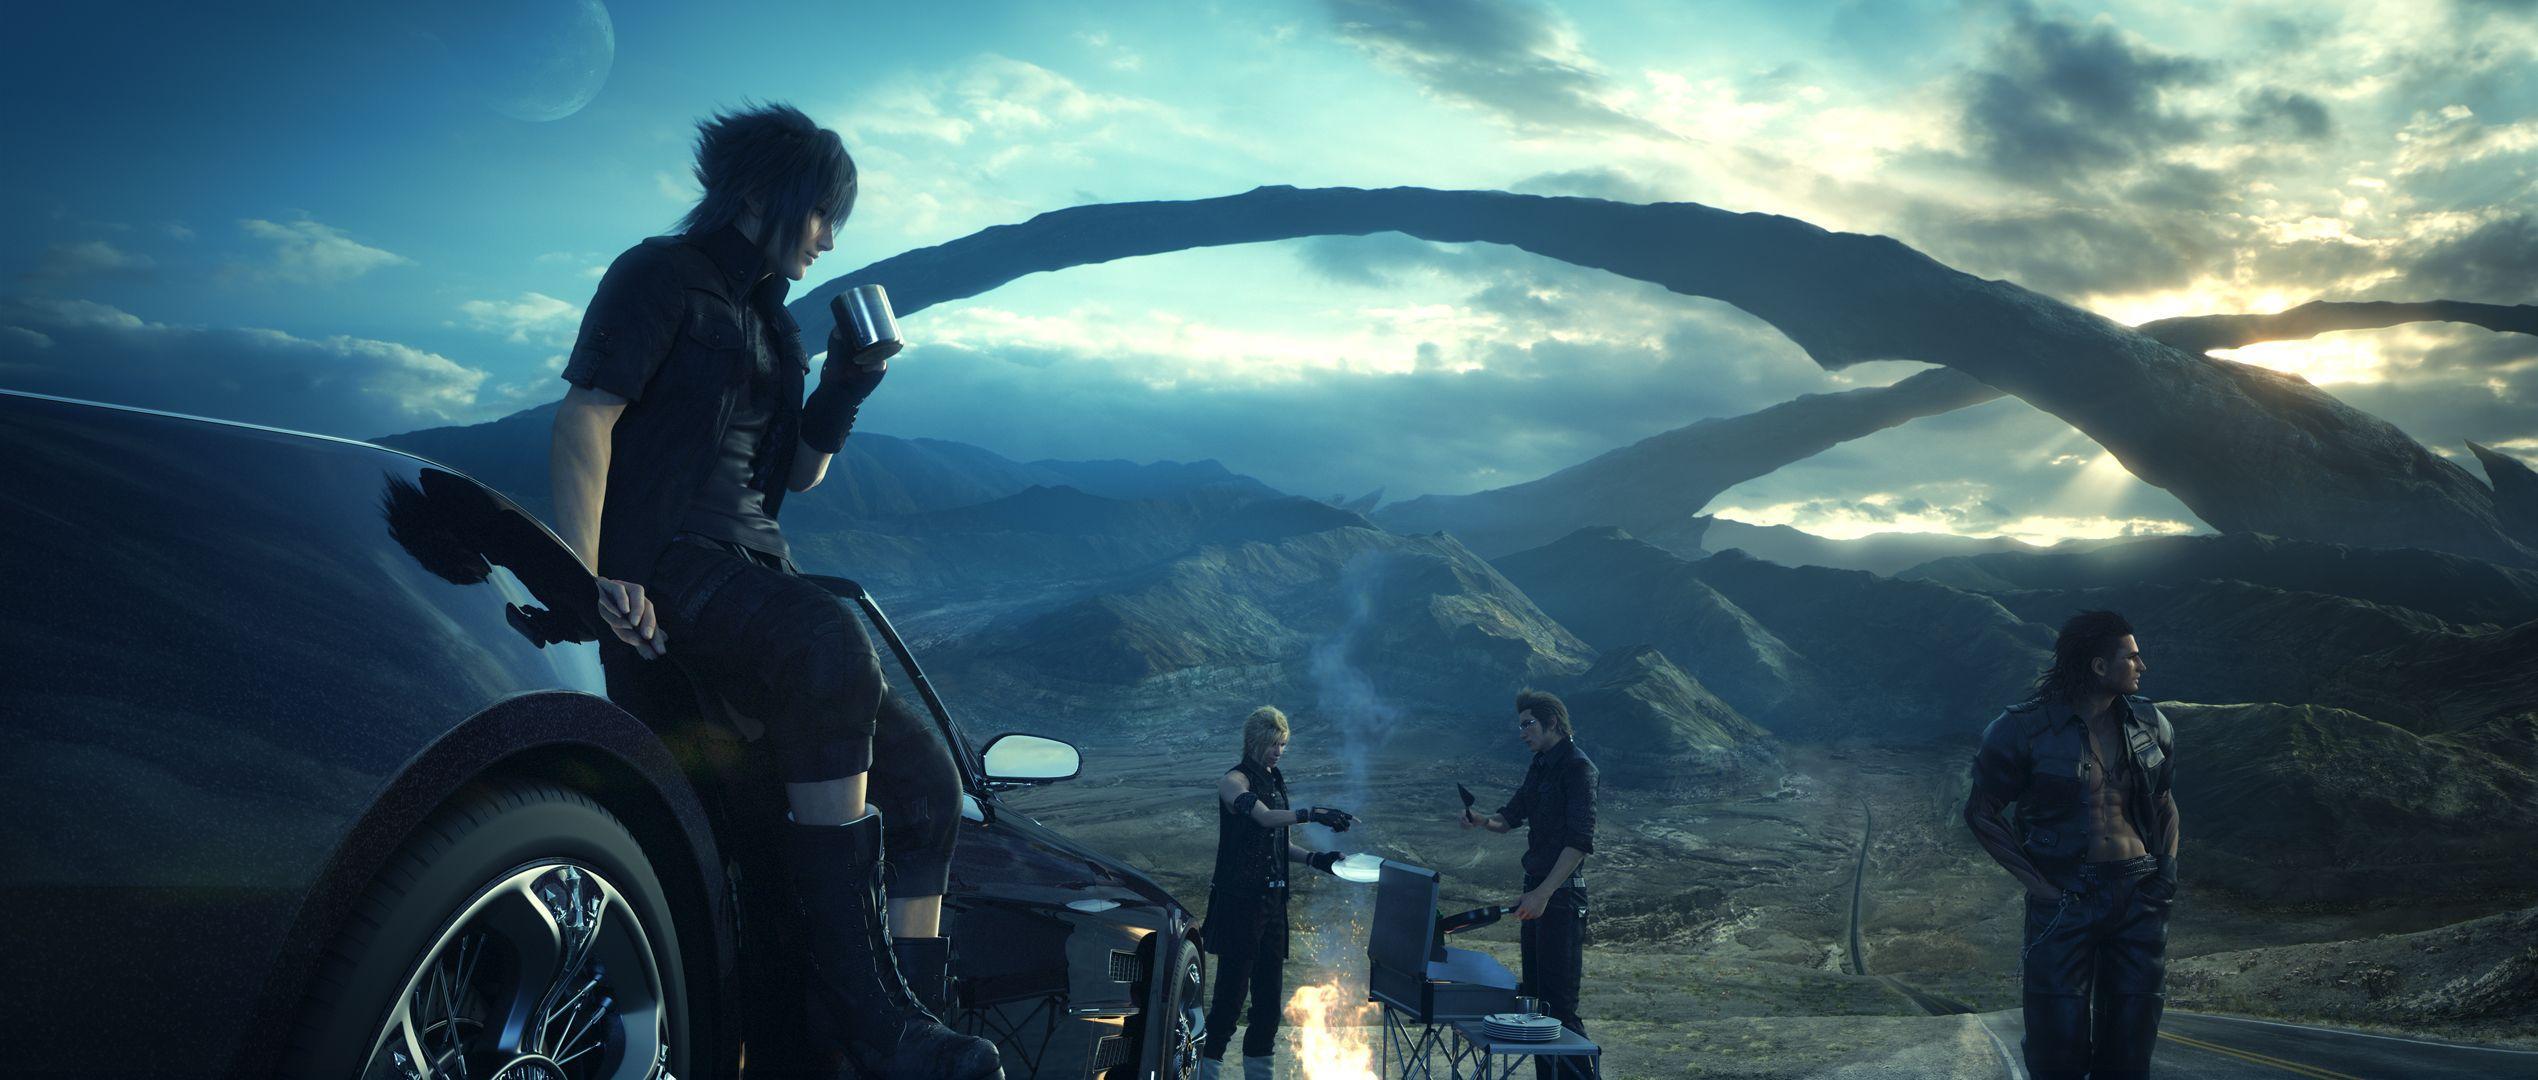 Ff 15 Wallpapers Top Free Ff 15 Backgrounds Wallpaperaccess